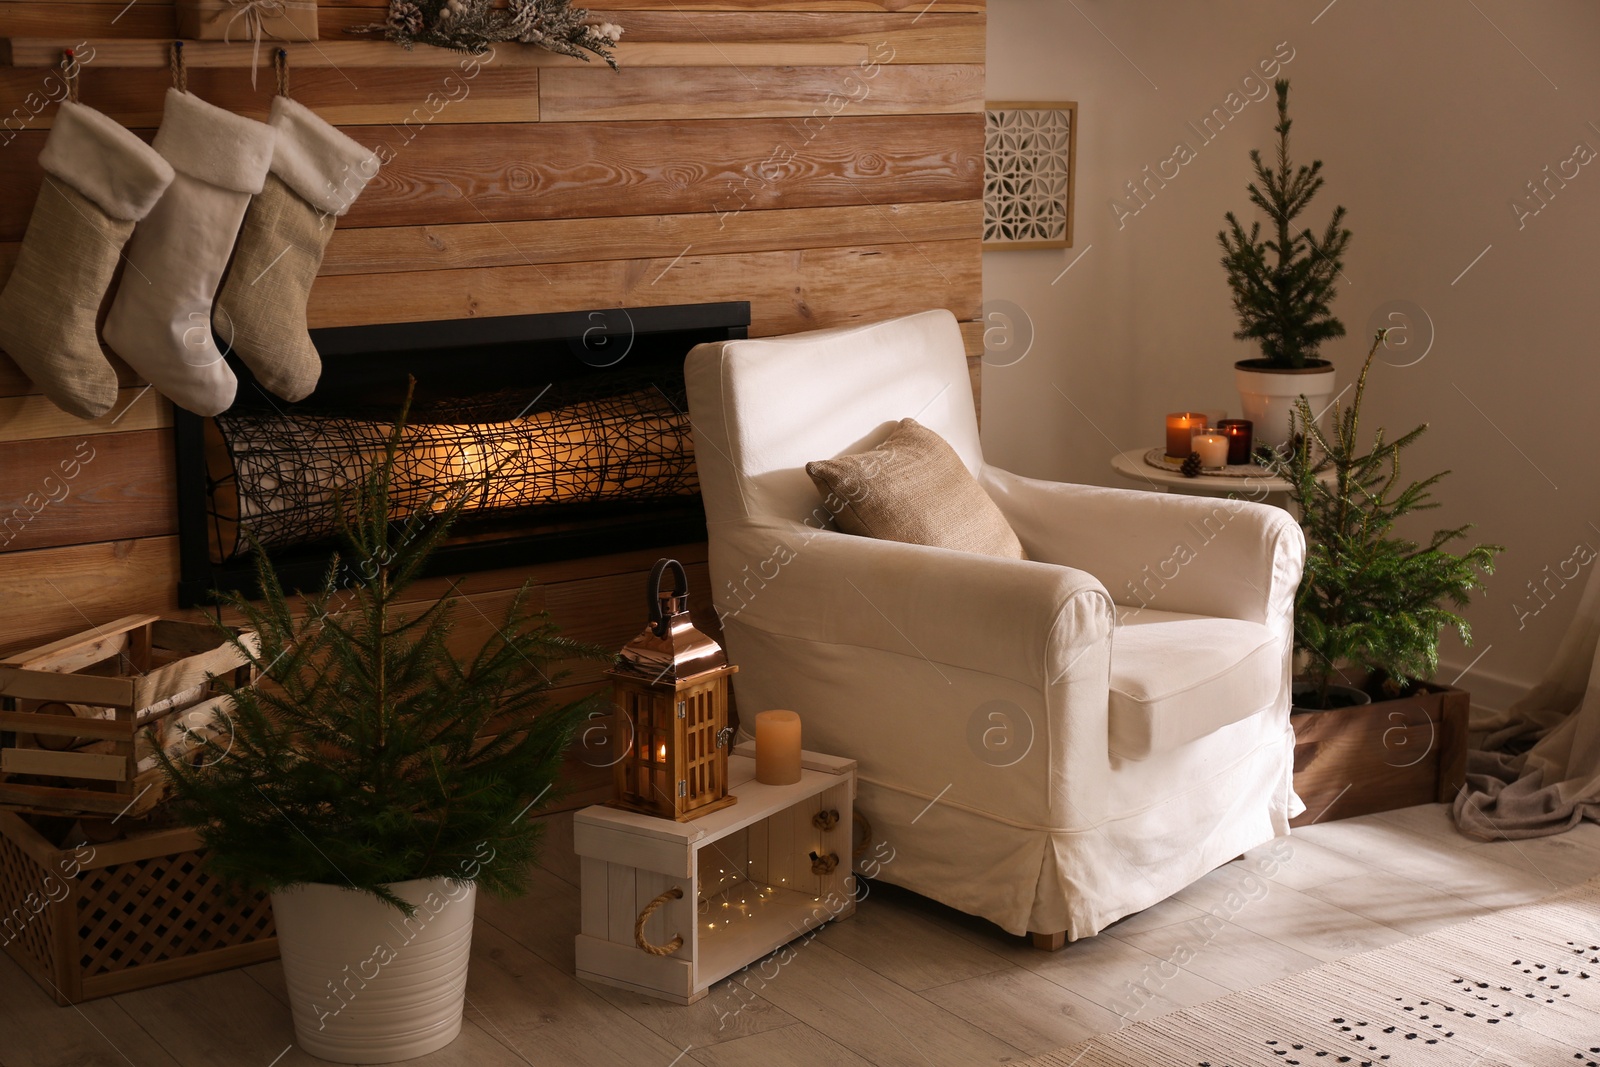 Photo of Potted fir trees and Christmas decorations in room with fireplace. Stylish interior design